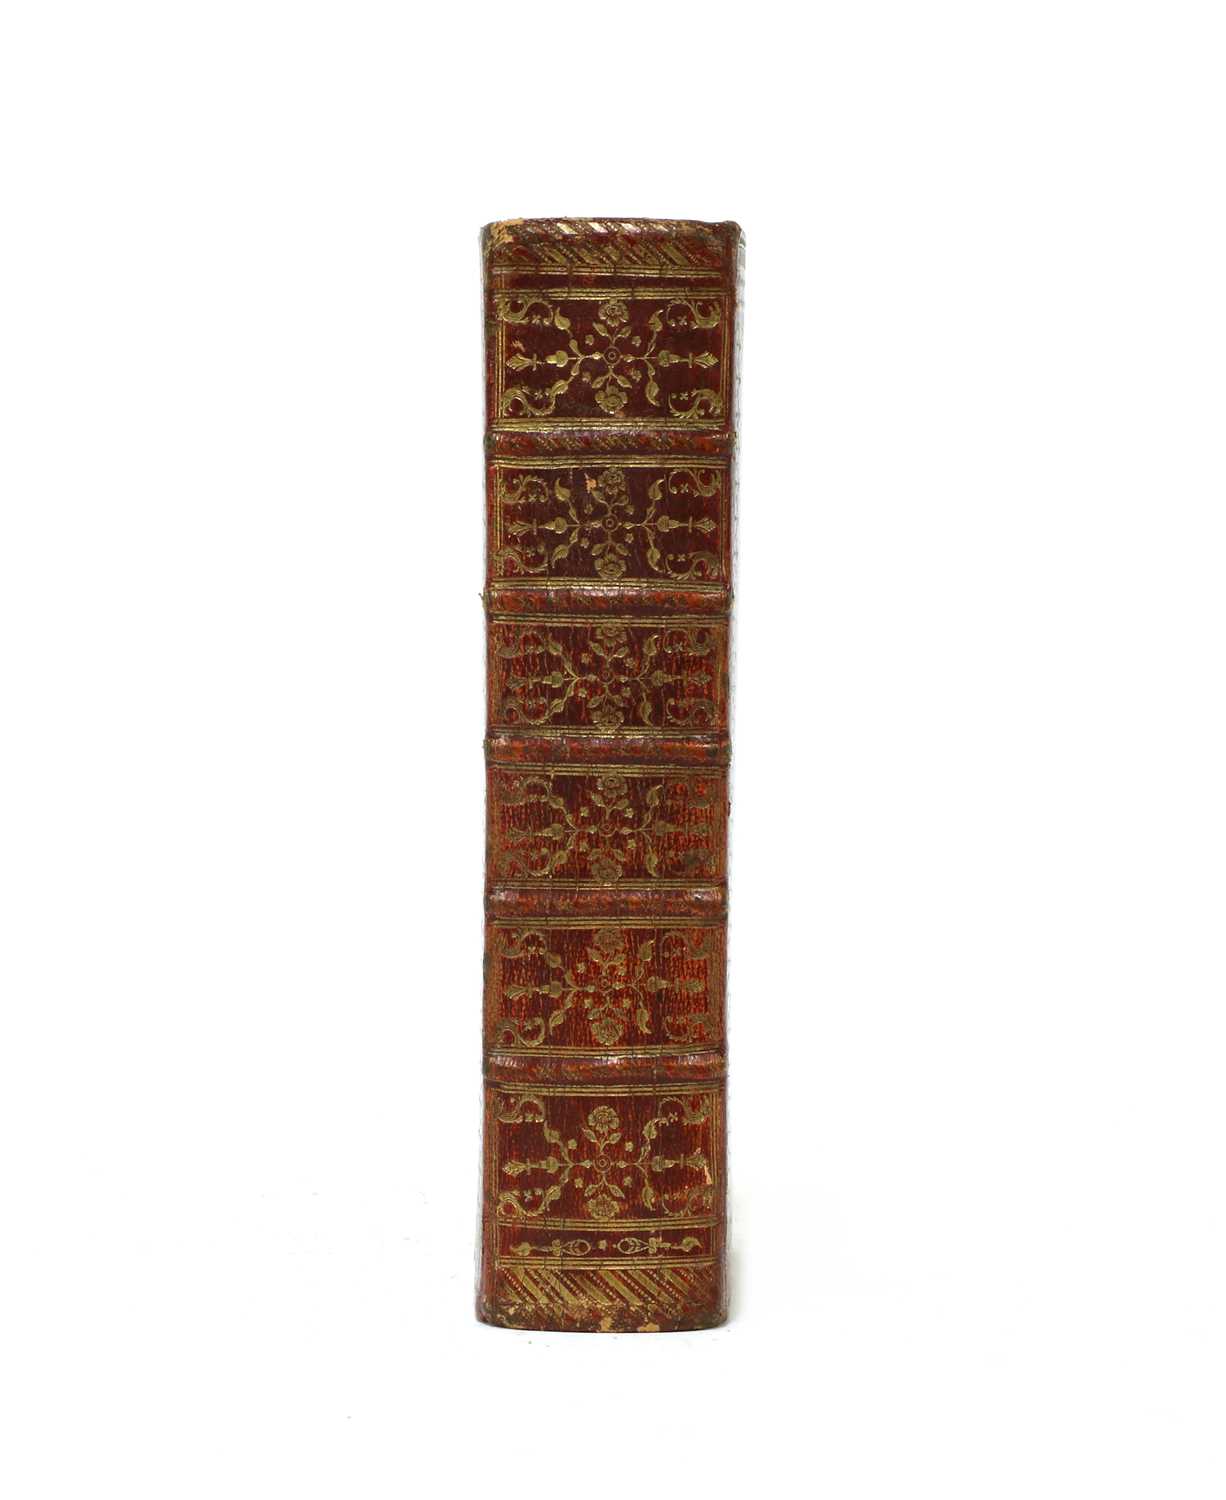 Lot 110 - The Book of Common Prayer.